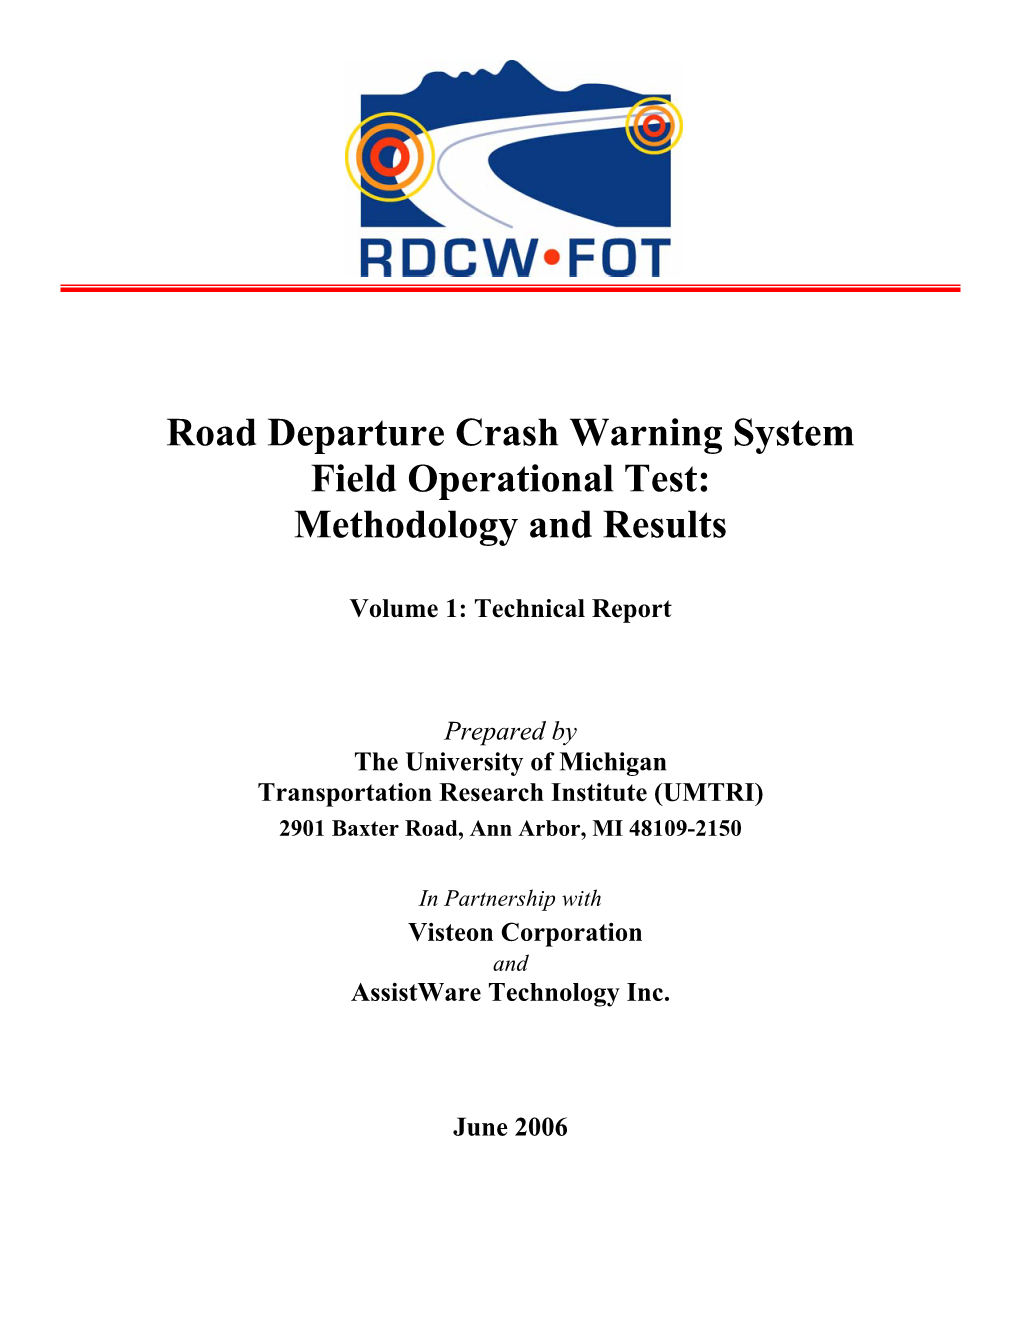 Road Departure Crash Warning System Field Operational Test: Methodology and Results